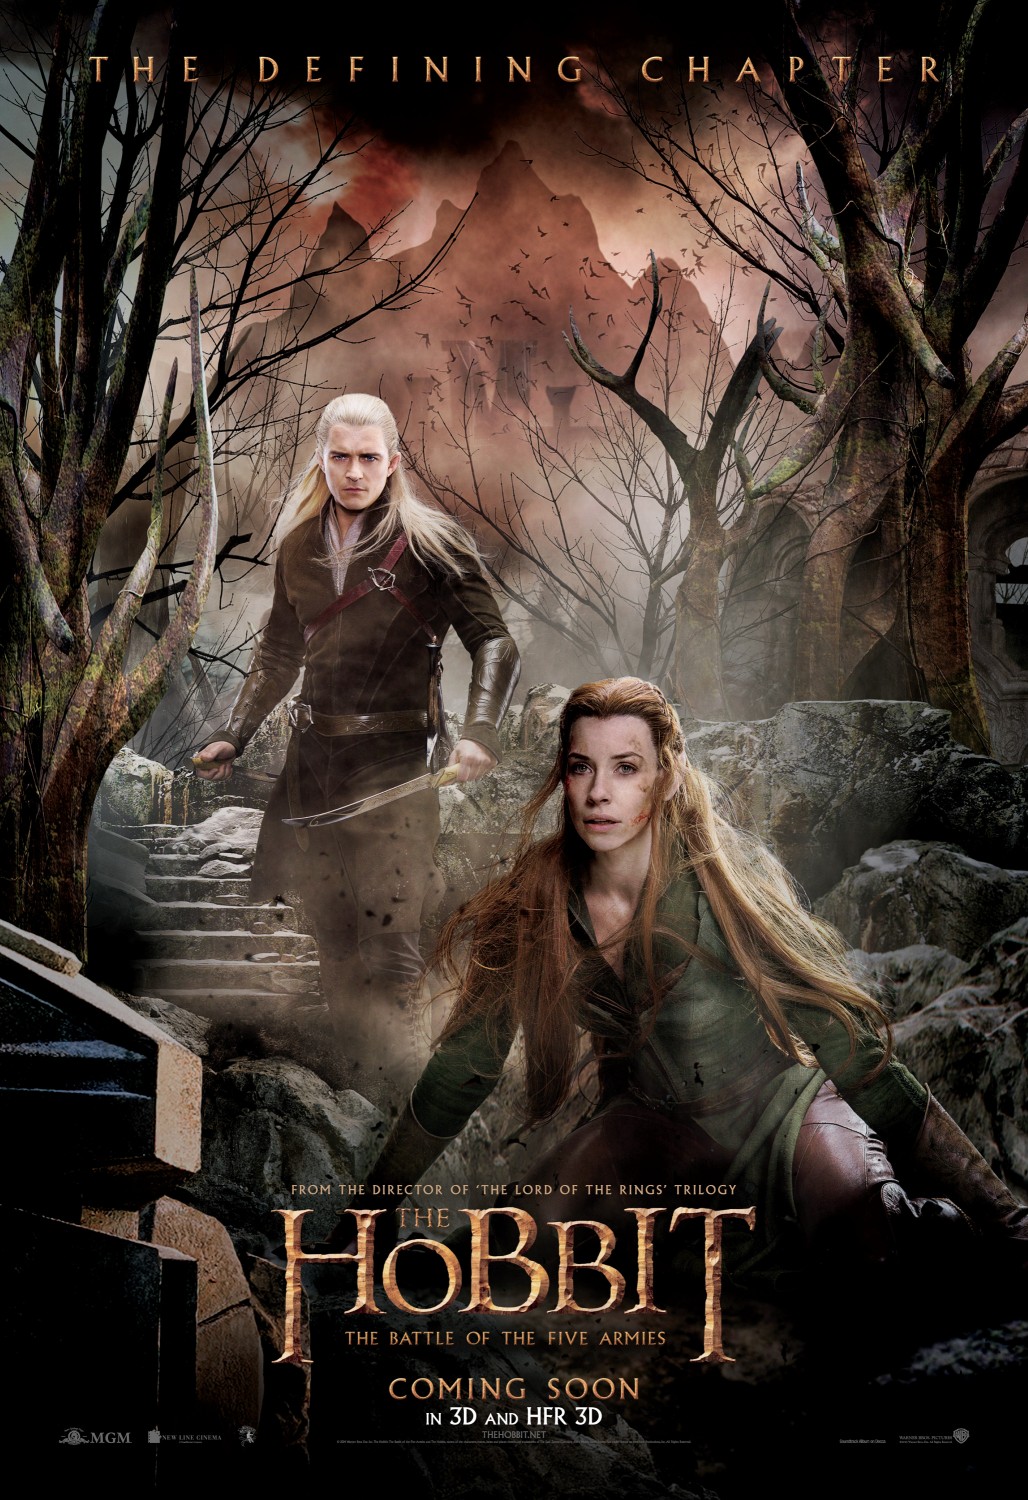 Extra Large Movie Poster Image for The Hobbit: The Battle of the Five Armies (#28 of 28)